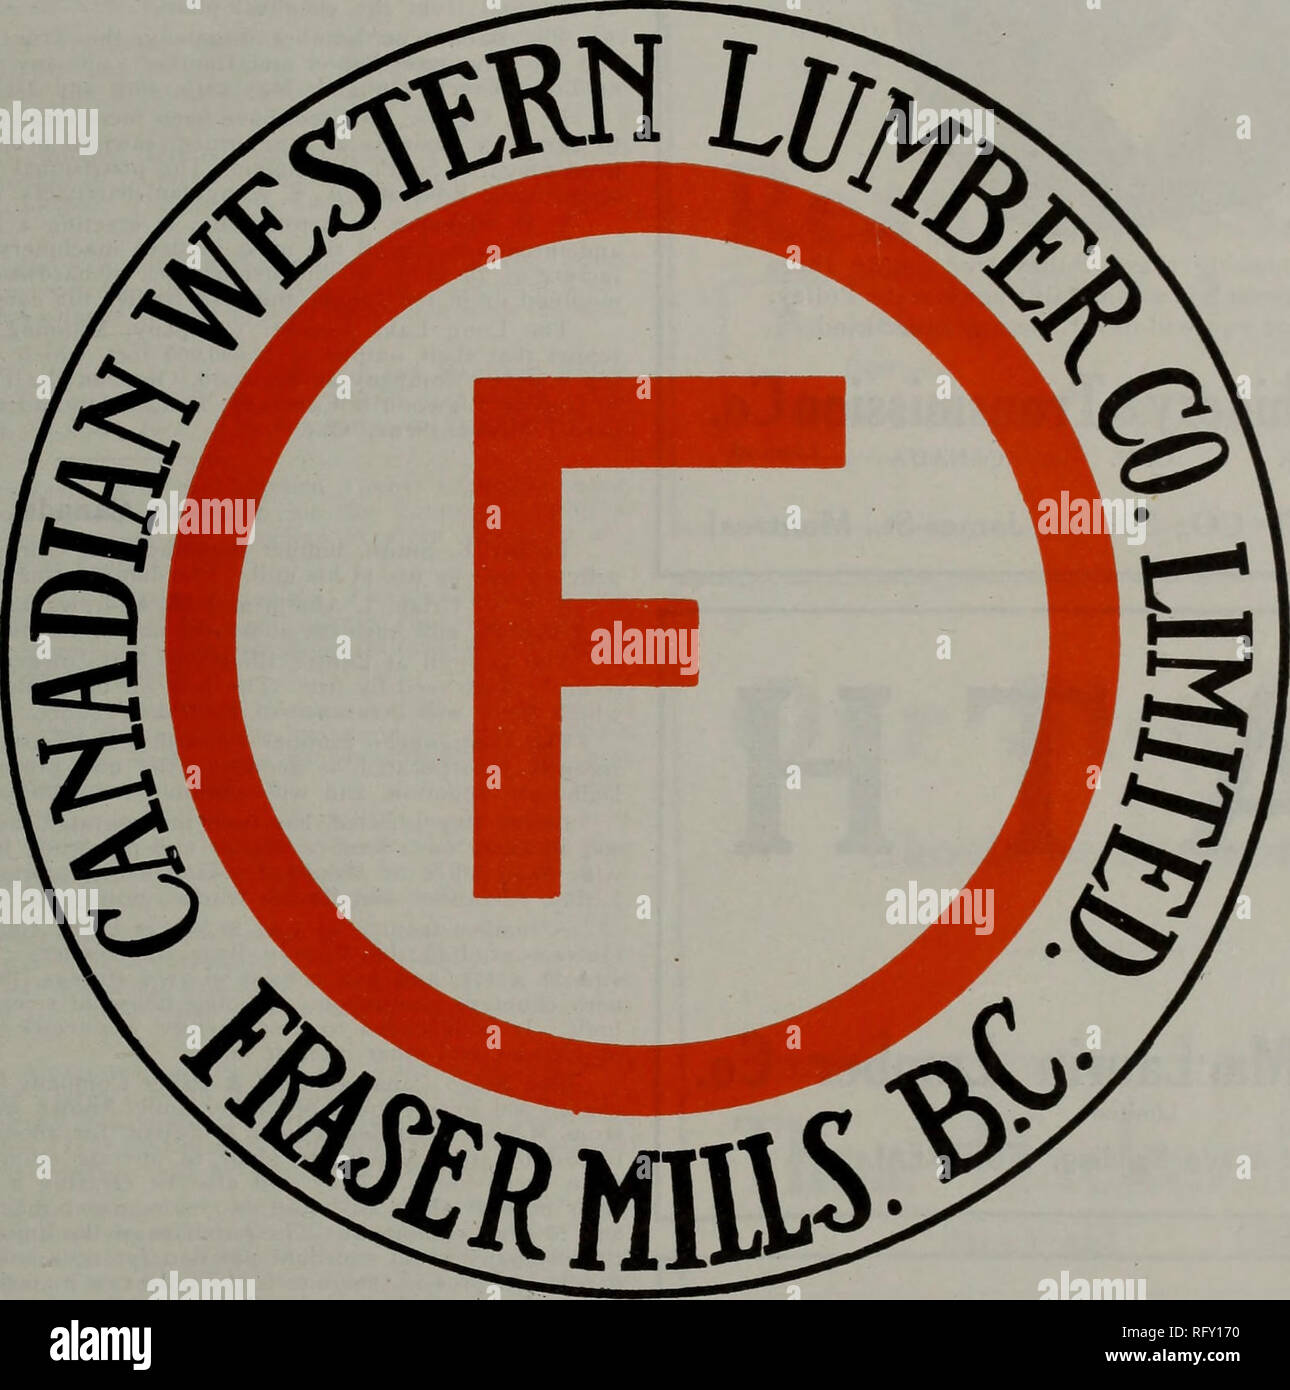 . Canadian forest industries January-June 1913. Lumbering; Forests and forestry; Forest products; Wood-pulp industry; Wood-using industries. CANADA LUMBERMAN AND WOODWORKER 55 Fir Lumber and Timber Manufactured from the Finest Standing Timber in British Columbia, in Canada's Largest Sawmill Railroad and Structural Timber, Flooring, Ceiling, Cross Arms and Interior Finish PROMPT SHIPMENT F I R C R O S s A R M S. E. G. F 1 R F L O O R I N G Capacity 750,000 ft. daily We Dress Timber up to 24 x 36 Mail or Wire your Inquiries to nearest Branch Sales Office— TORONTO 70 King Street East WINNIPEG, MA Stock Photo